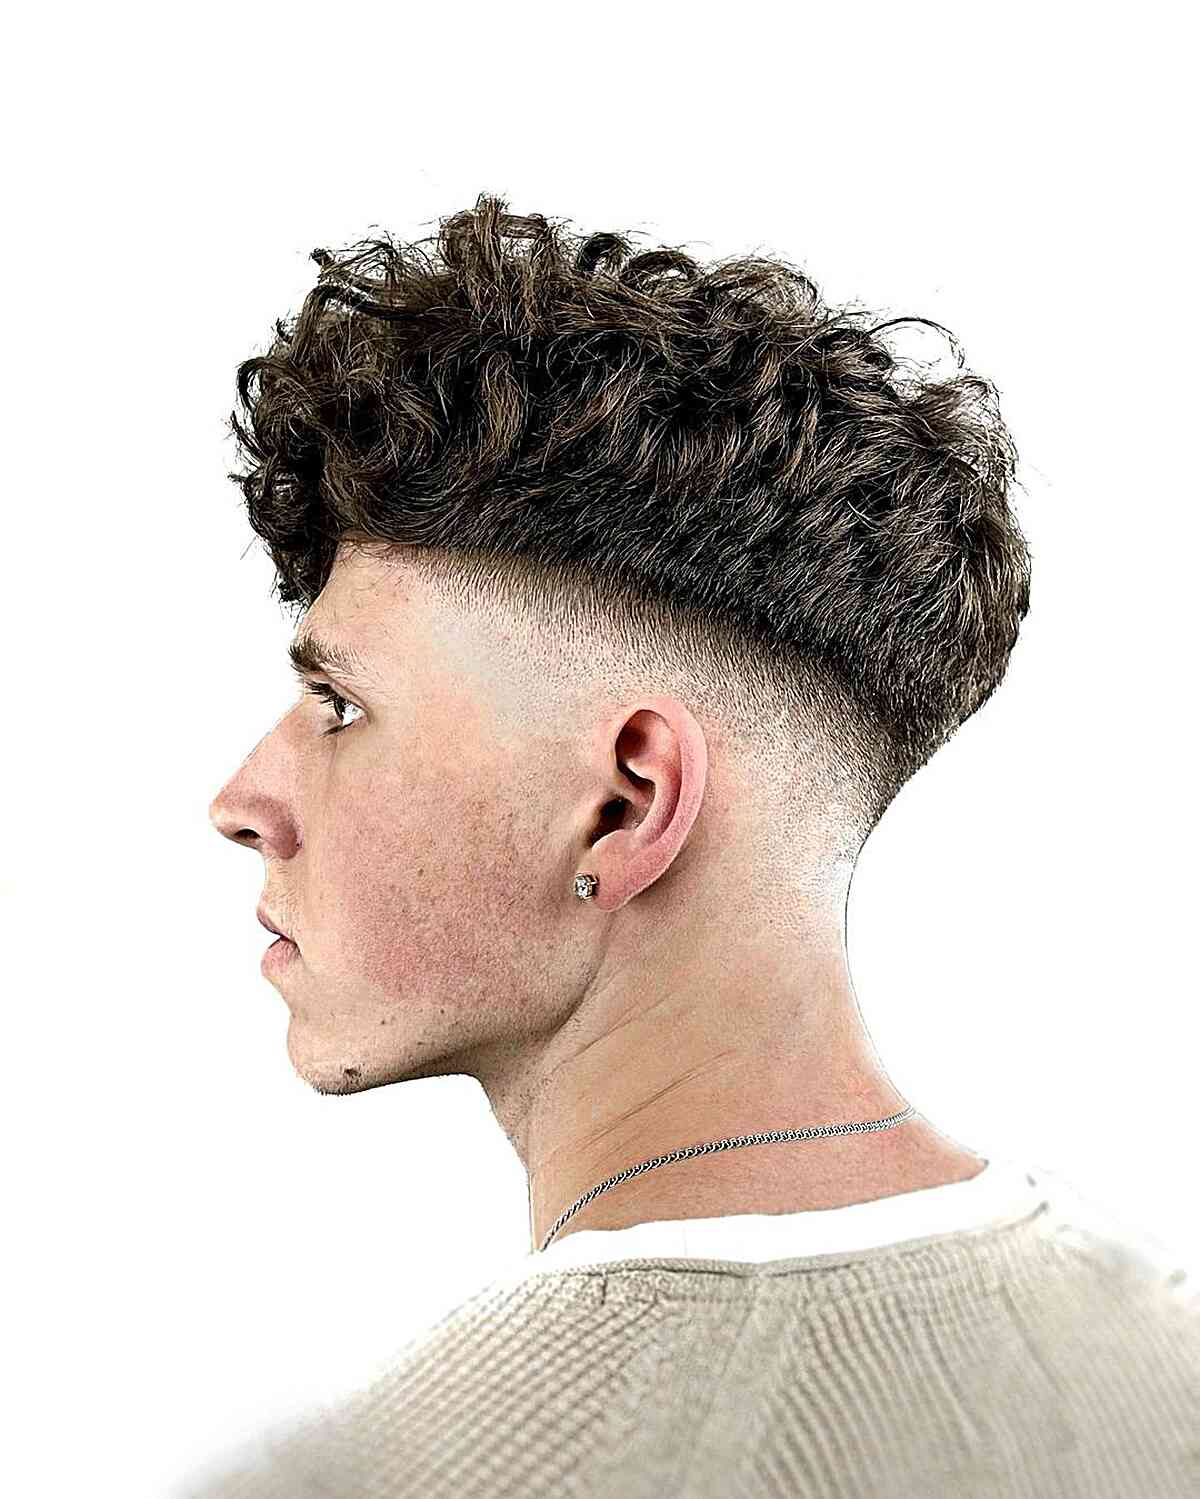 Bald Fade with Volume on Top for Guys with curly hair